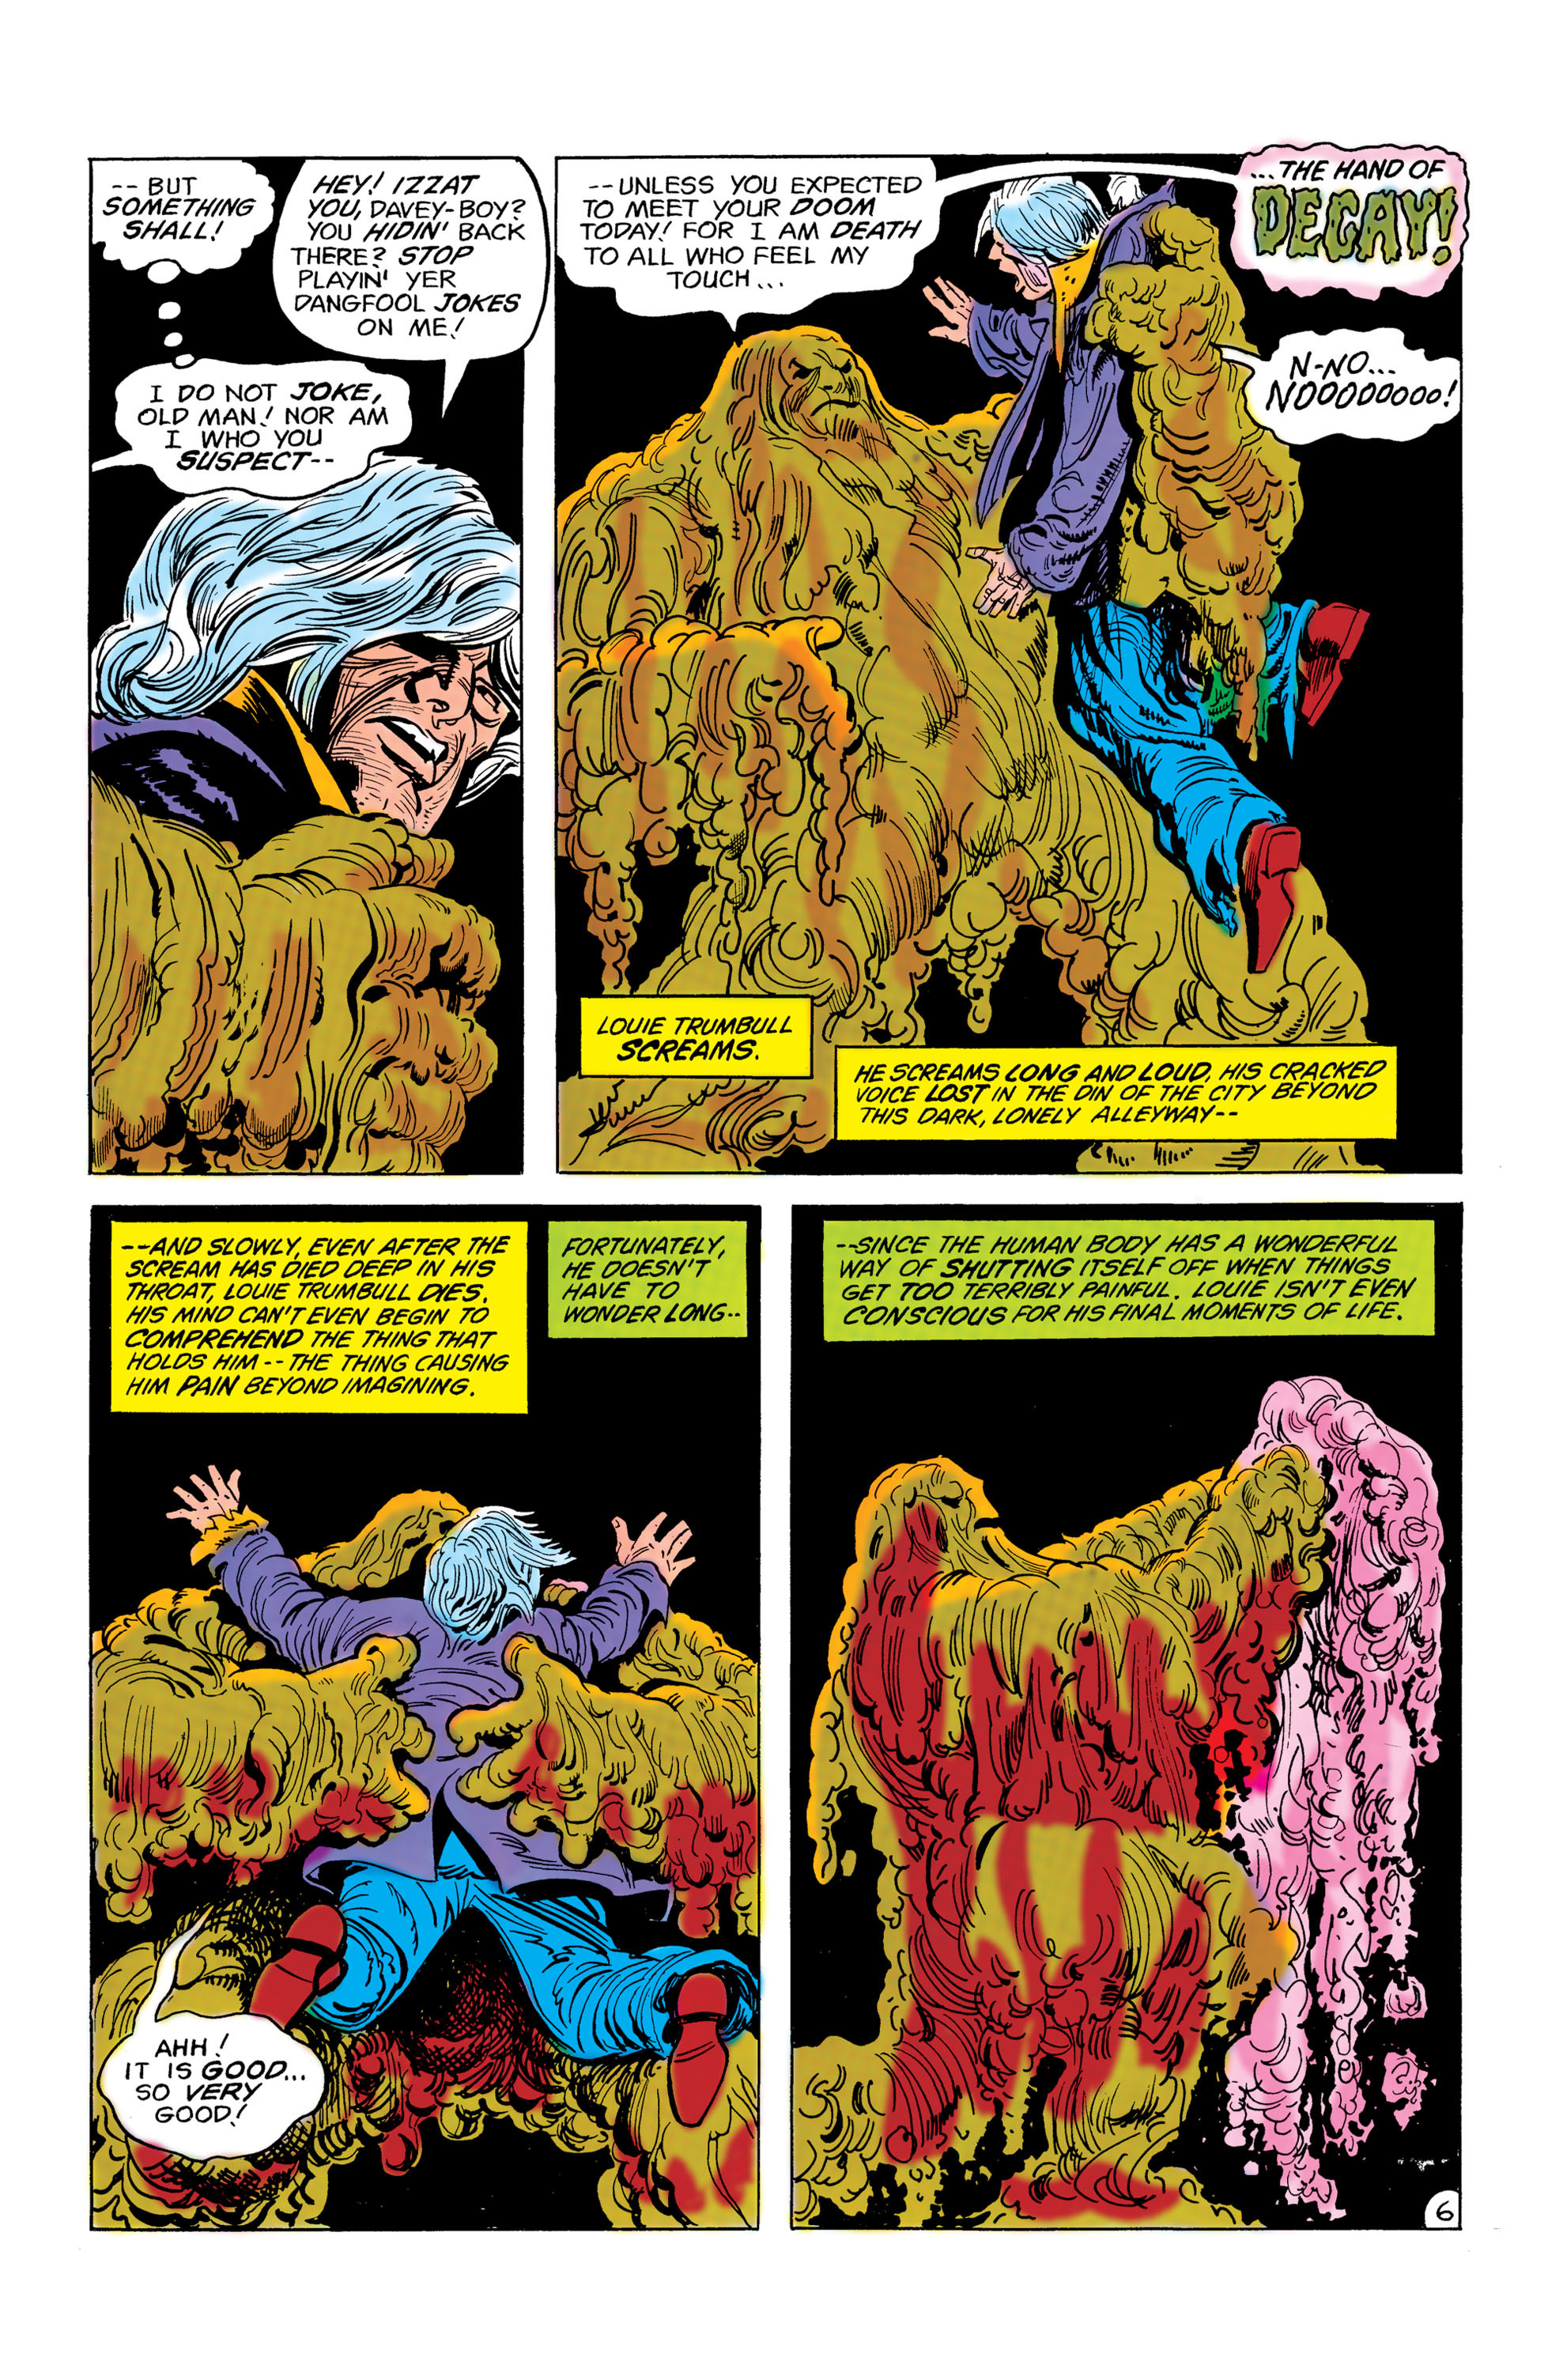 Supergirl (1982) 3 Page 6